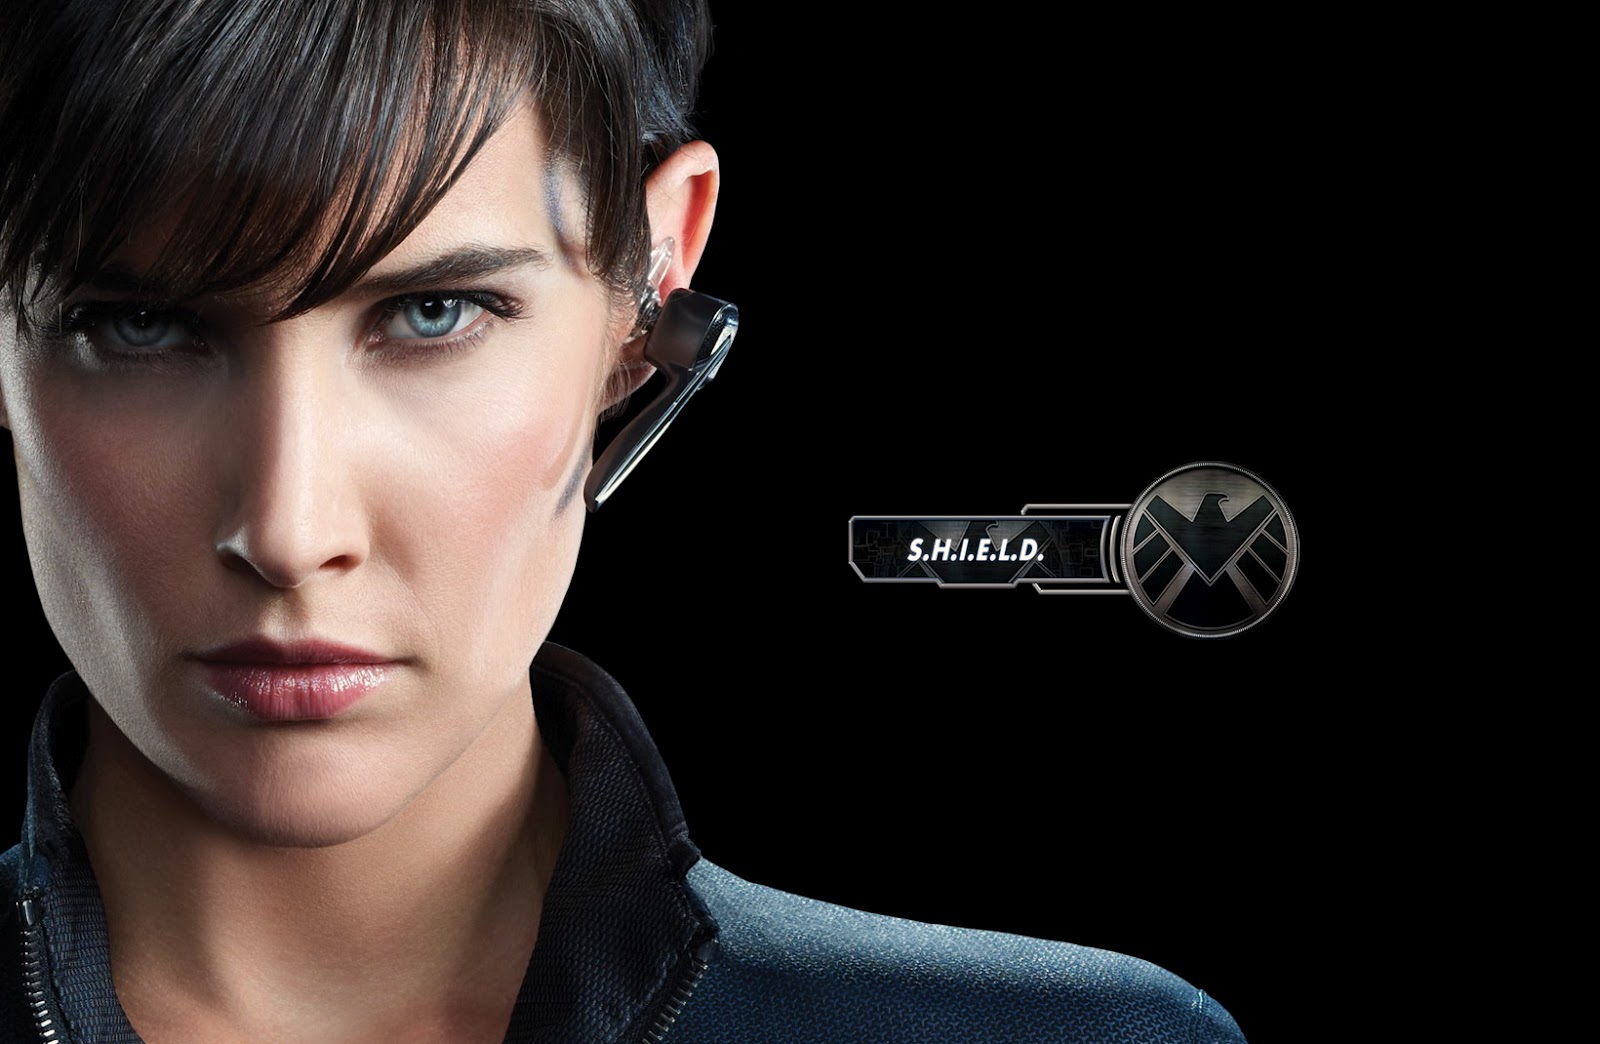 Marvel's the Avengers Movie 2012 (Marvel Avengers Assemble in the UK) is Cobie Smulders as Maria Hill Character the Avengers Movie 2012 are Cobie Smulders as Maria Hill Character